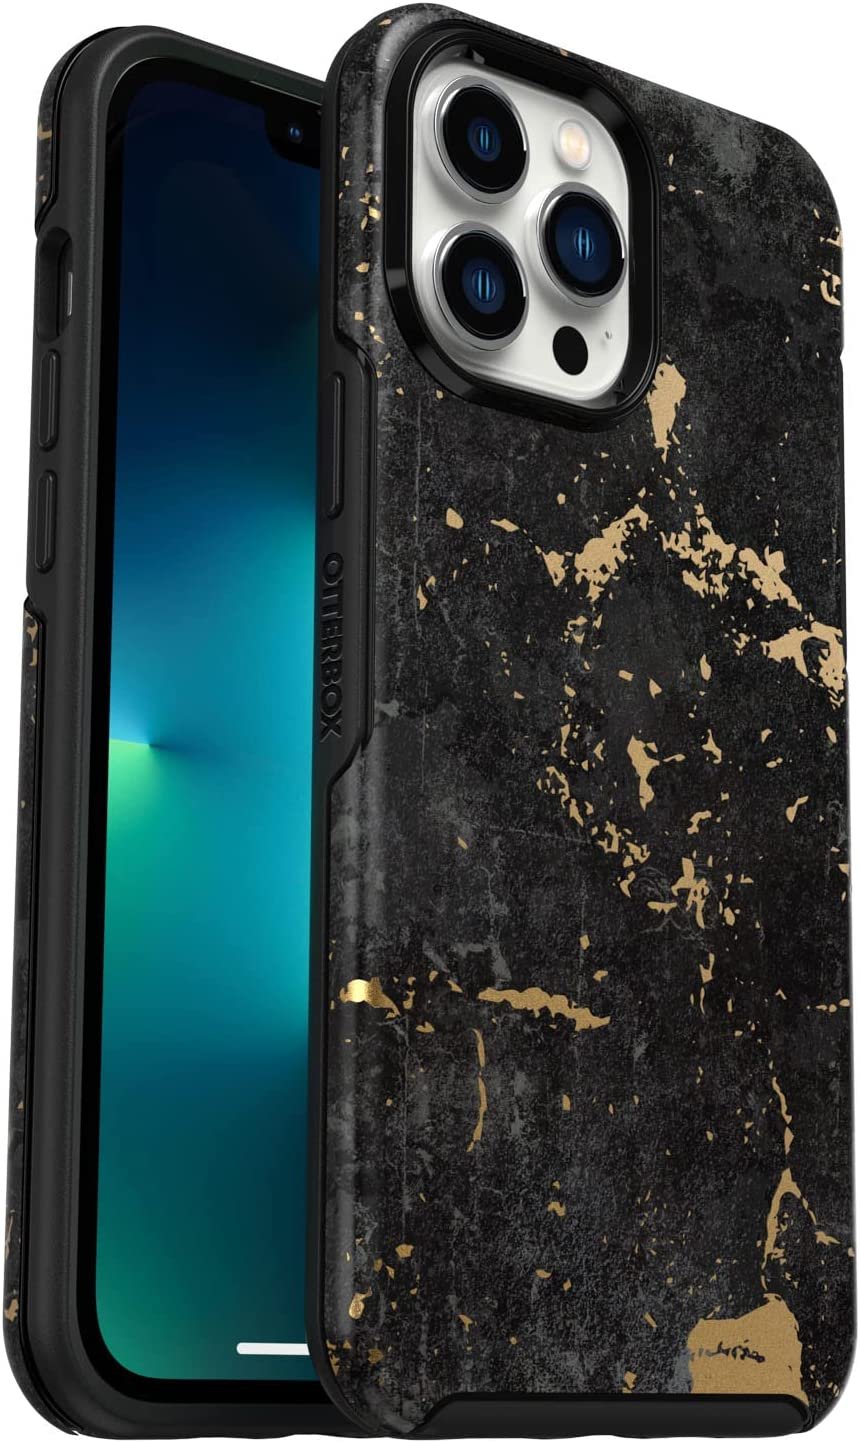 Amazon.com: OtterBox iPhone 12/13 Pro Max Symmetry Series Case - ENIGMA (BLACK/ENIGMA GRAPHIC), ultra-sleek, wireless charging compatible, raised edges protect cam $16.33